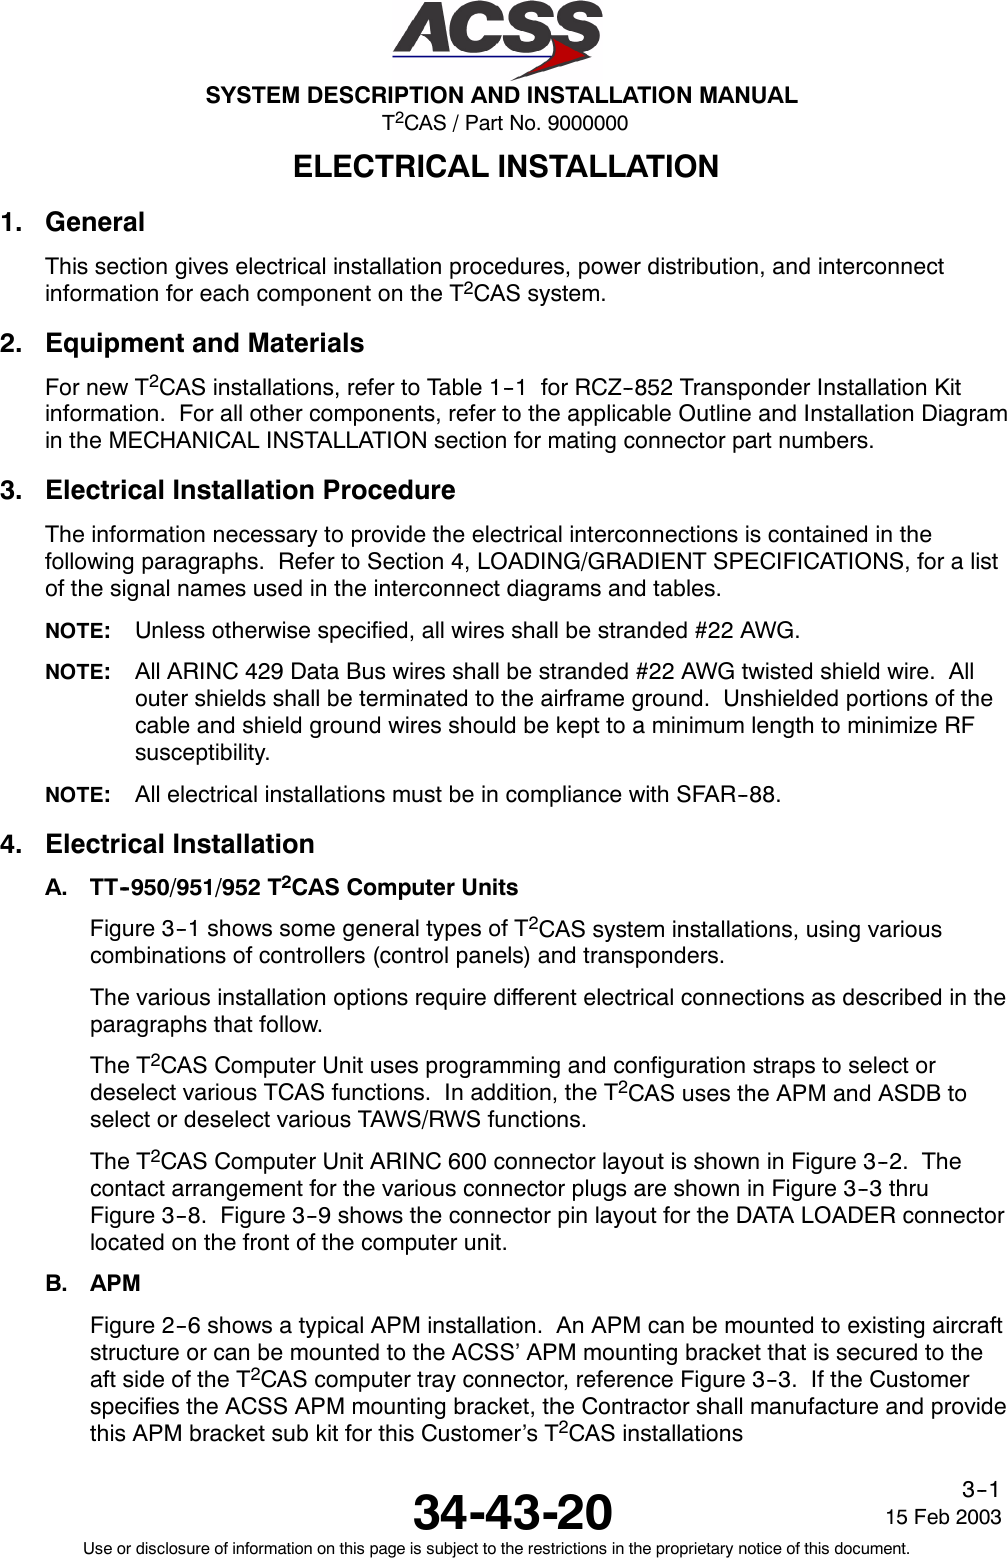 T2CAS / Part No. 9000000SYSTEM DESCRIPTION AND INSTALLATION MANUAL34-43-20 15 Feb 2003Use or disclosure of information on this page is subject to the restrictions in the proprietary notice of this document.3--1ELECTRICAL INSTALLATION1. GeneralThis section gives electrical installation procedures, power distribution, and interconnectinformation for each component on the T2CAS system.2. Equipment and MaterialsFor new T2CAS installations, refer to Table 1--1 for RCZ--852 Transponder Installation Kitinformation. For all other components, refer to the applicable Outline and Installation Diagramin the MECHANICAL INSTALLATION section for mating connector part numbers.3. Electrical Installation ProcedureThe information necessary to provide the electrical interconnections is contained in thefollowing paragraphs. Refer to Section 4, LOADING/GRADIENT SPECIFICATIONS, for a listof the signal names used in the interconnect diagrams and tables.NOTE:Unless otherwise specified, all wires shall be stranded #22 AWG.NOTE:All ARINC 429 Data Bus wires shall be stranded #22 AWG twisted shield wire. Allouter shields shall be terminated to the airframe ground. Unshielded portions of thecable and shield ground wires should be kept to a minimum length to minimize RFsusceptibility.NOTE:All electrical installations must be in compliance with SFAR--88.4. Electrical InstallationA. TT--950/951/952 T2CAS Computer UnitsFigure 3--1 shows some general types of T2CAS system installations, using variouscombinations of controllers (control panels) and transponders.The various installation options require different electrical connections as described in theparagraphs that follow.The T2CAS Computer Unit uses programming and configuration straps to select ordeselect various TCAS functions. In addition, the T2CAS uses the APM and ASDB toselect or deselect various TAWS/RWS functions.The T2CAS Computer Unit ARINC 600 connector layout is shown in Figure 3--2. Thecontact arrangement for the various connector plugs are shown in Figure 3--3 thruFigure 3--8. Figure 3--9 shows the connector pin layout for the DATA LOADER connectorlocated on the front of the computer unit.B. APMFigure 2--6 shows a typical APM installation. An APM can be mounted to existing aircraftstructure or can be mounted to the ACSS’ APM mounting bracket that is secured to theaftsideoftheT2CAS computer tray connector, reference Figure 3--3. If the Customerspecifies the ACSS APM mounting bracket, the Contractor shall manufacture and providethis APM bracket sub kit for this Customer’s T2CAS installations